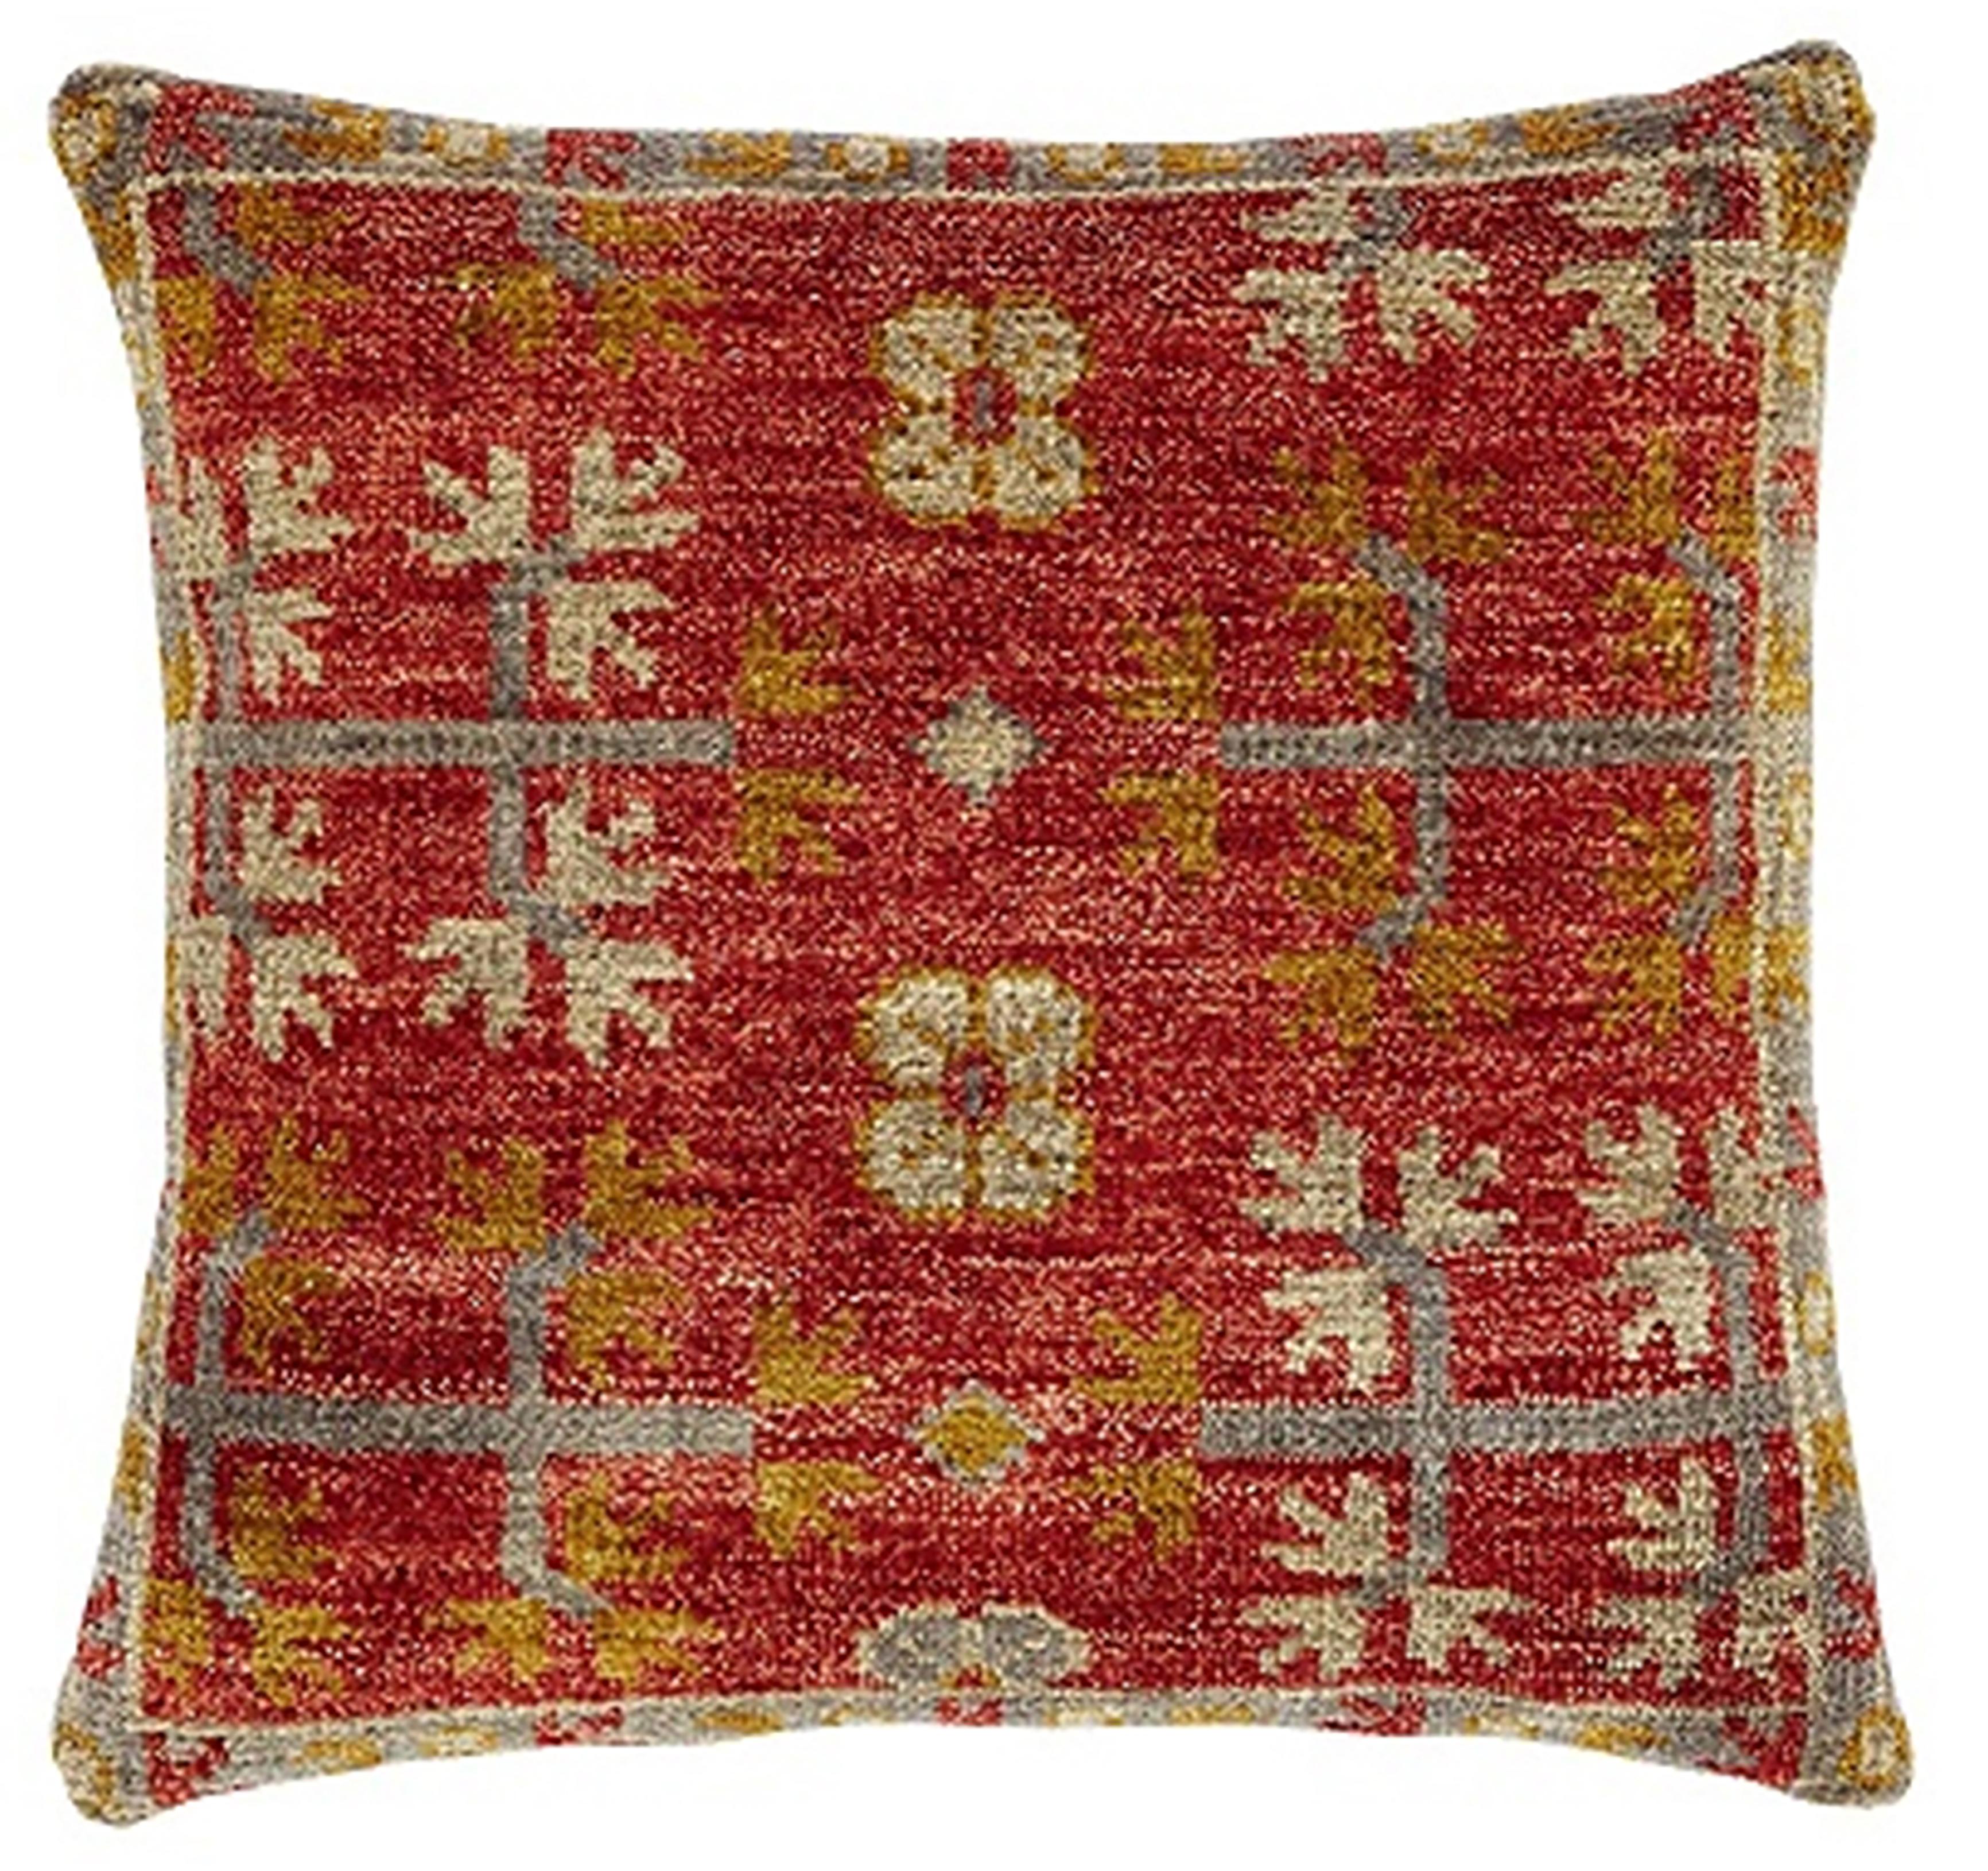 This new accent pillow of East-meets-West design aesthetic showcases a Tibetan design with predominant pimento color.

Hand made, using either 100% premium wool.

This pillow measure: 22